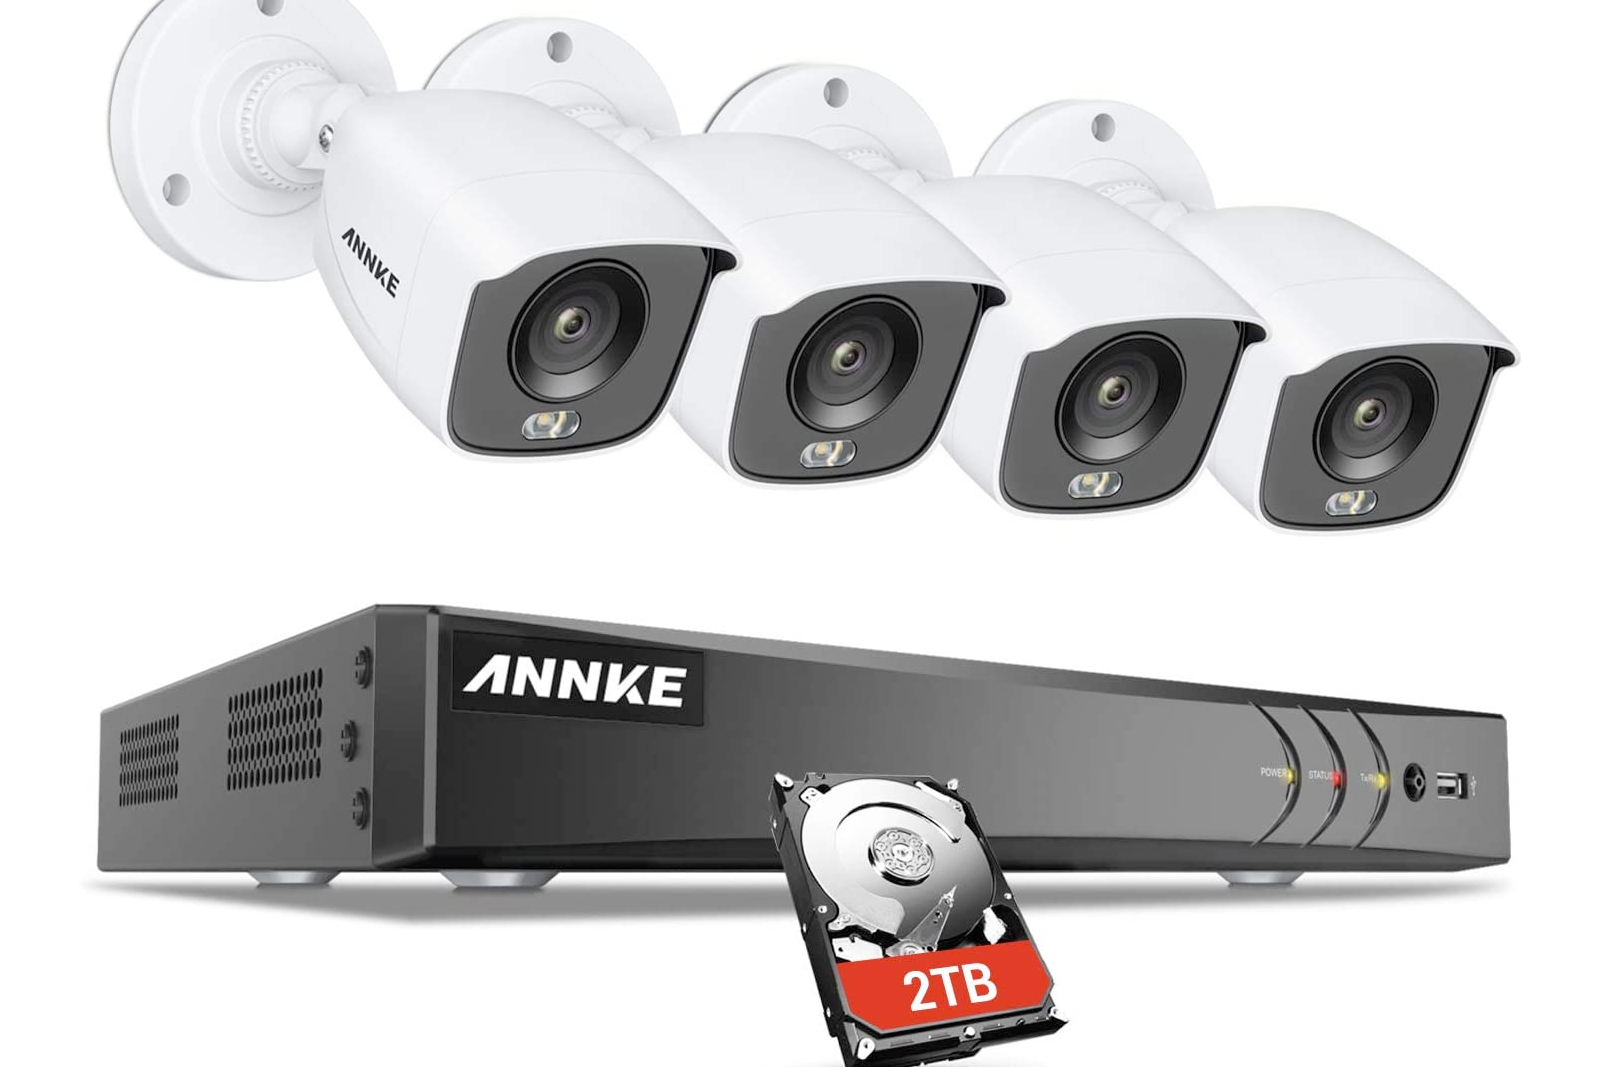 Annke home security deals for Prime Day photo 12